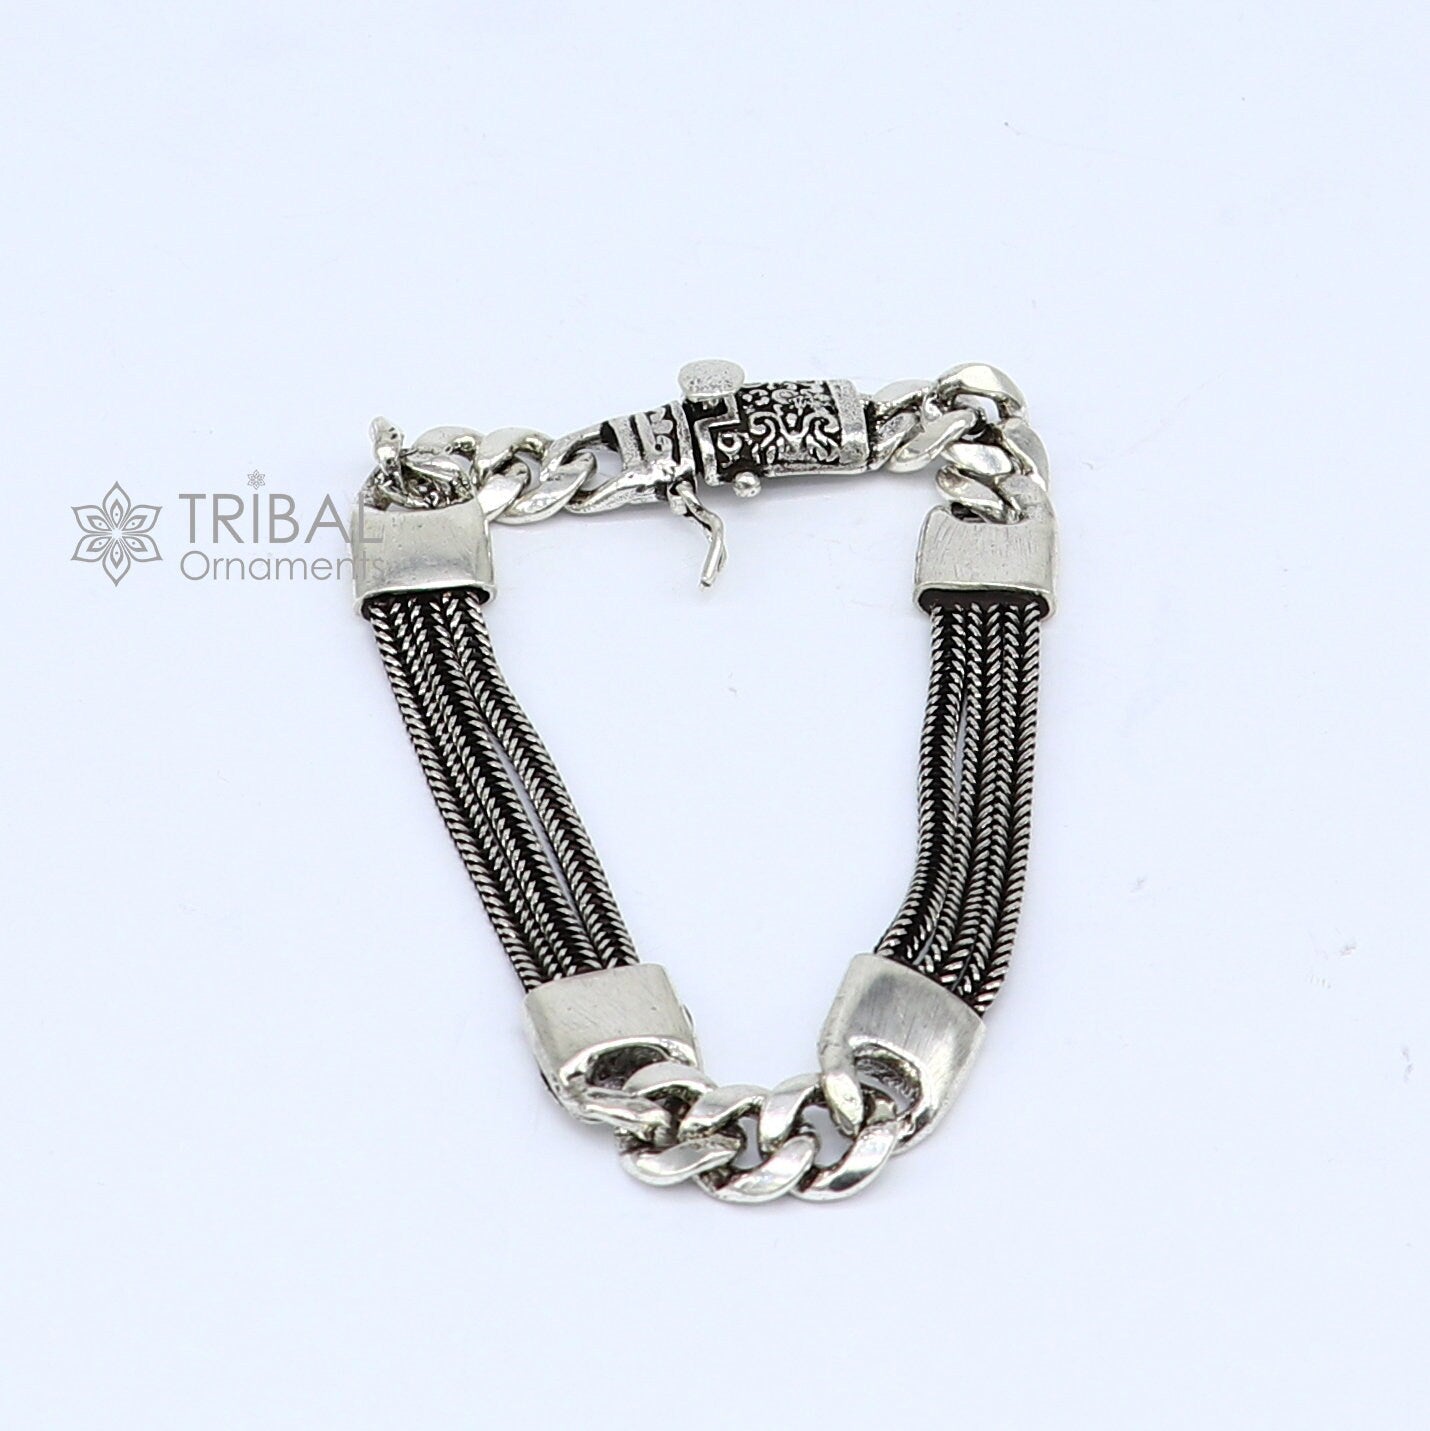 7.5" long 925 sterling silver handmade gorgeous solid chain flexible customized bracelet unisex personalized gift exclusive jewelry SBR705 - TRIBAL ORNAMENTS